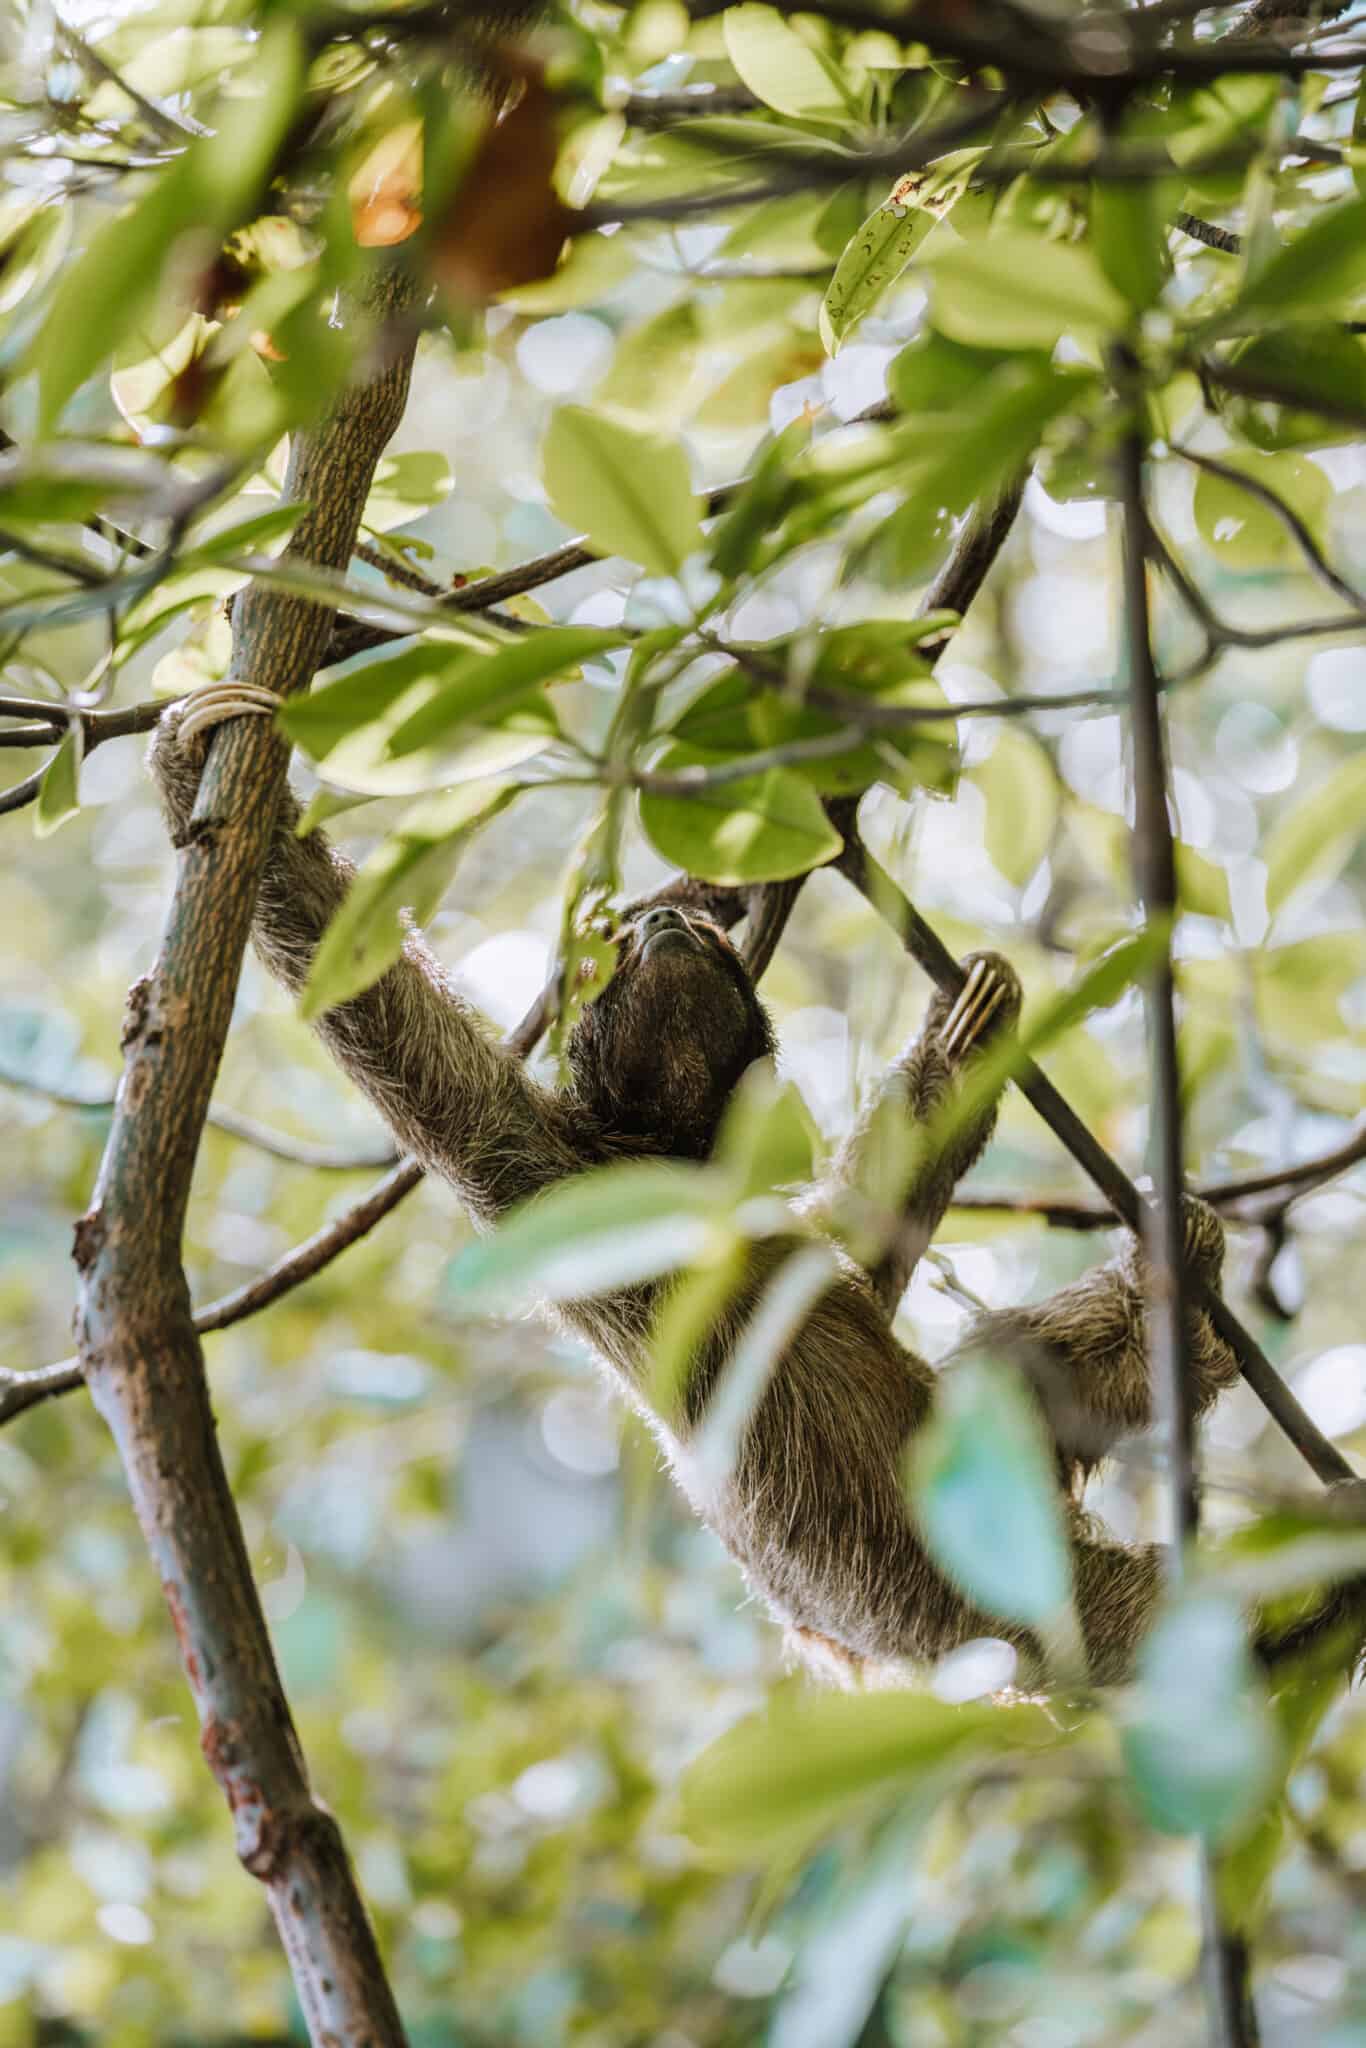 In Puerto Viejo, Costa Rica, a sloth is hanging from a tree branch.